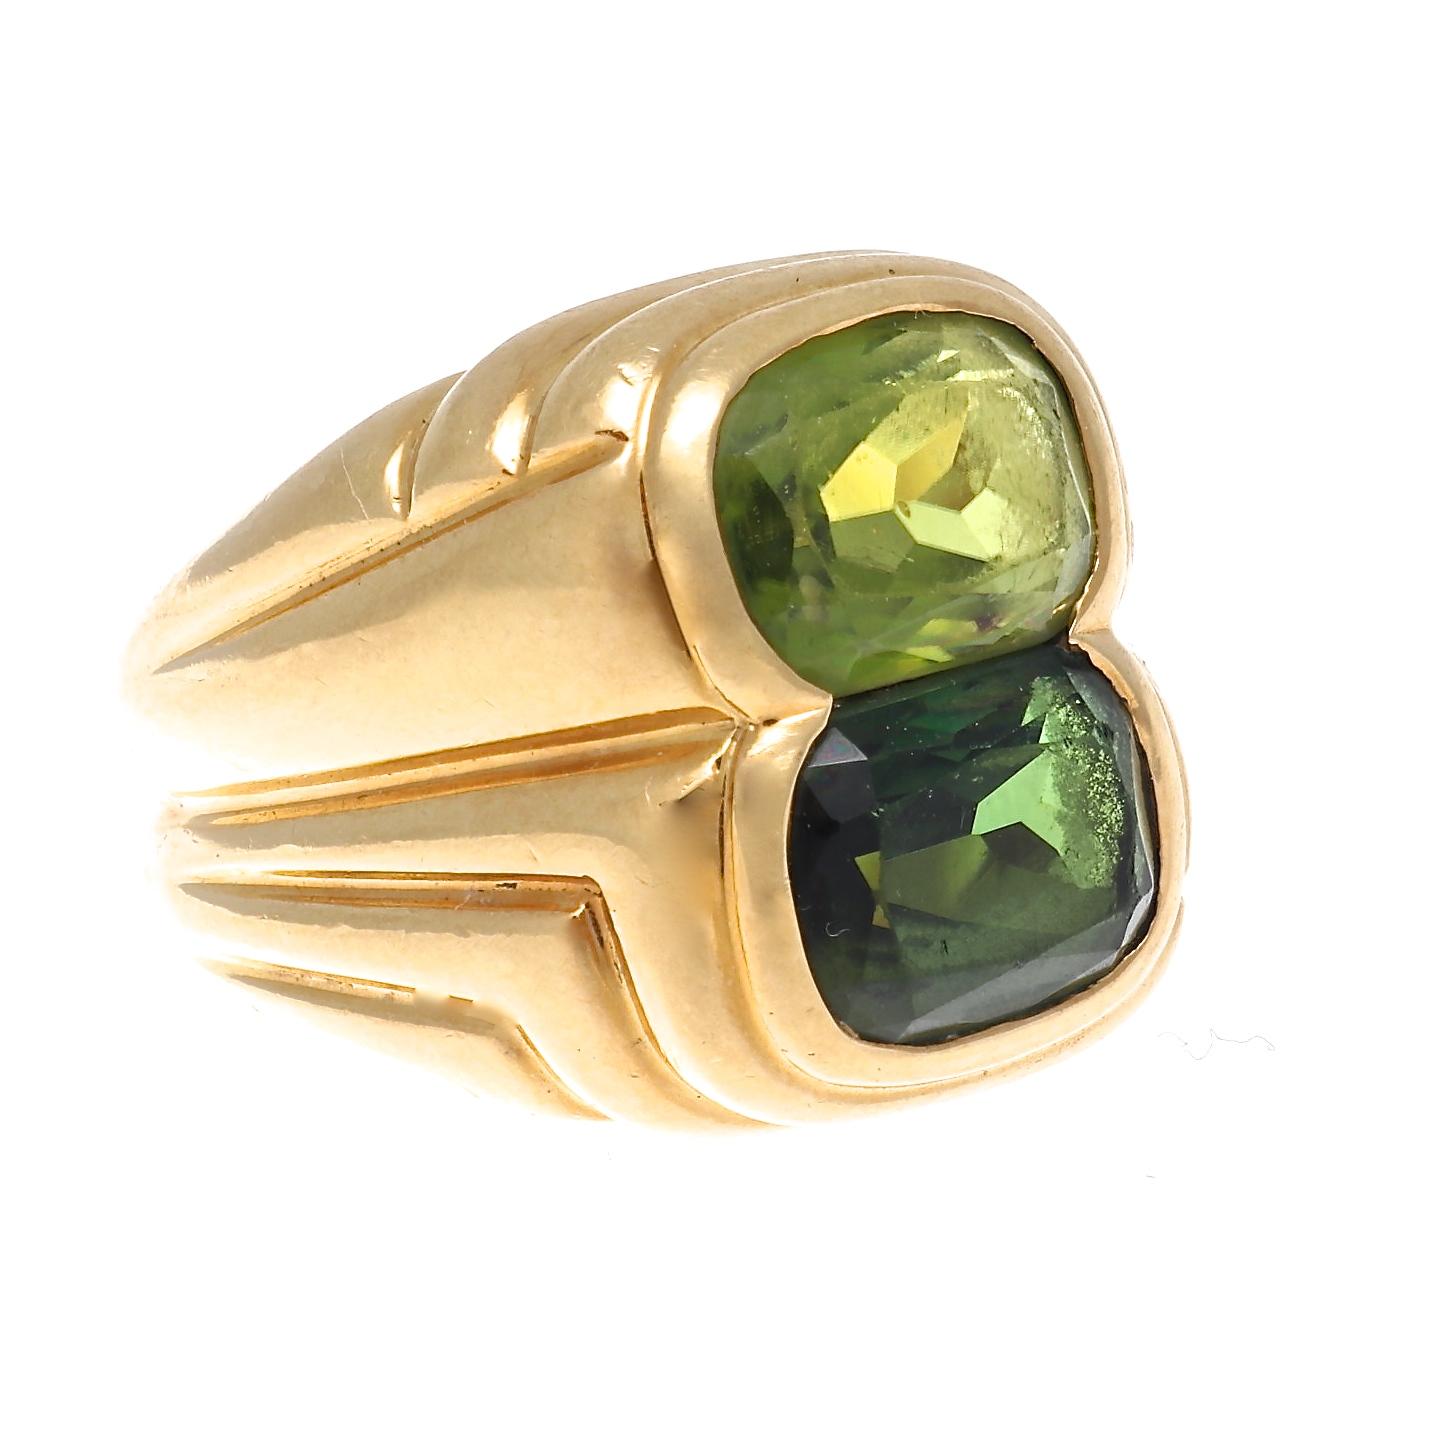 Peridot and green tourmaline ovals are stacked together to showcase their beauty, and are surrounded by iconic Bulgari designed lines in rich 18k gold. Complete with signature and serial number on the inside of the shank. Circa 1990. Ring size 6 1/2